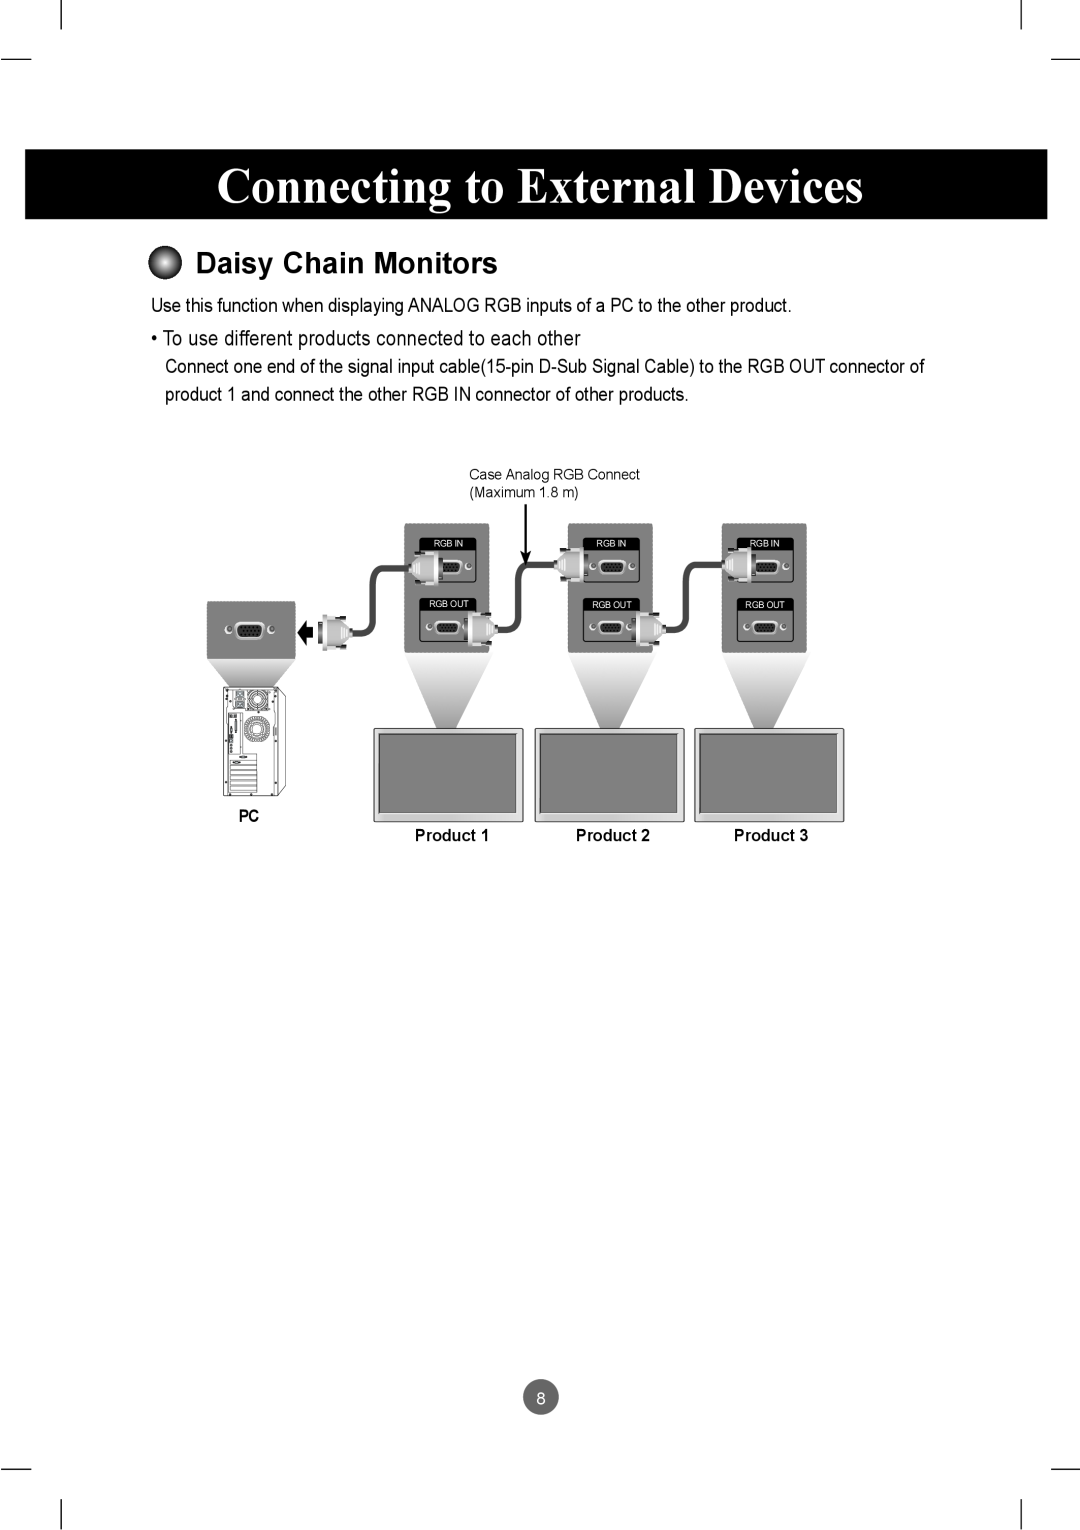 LG Electronics M2901S, M3801S owner manual Daisy Chain Monitors, Connecting to External Devices 